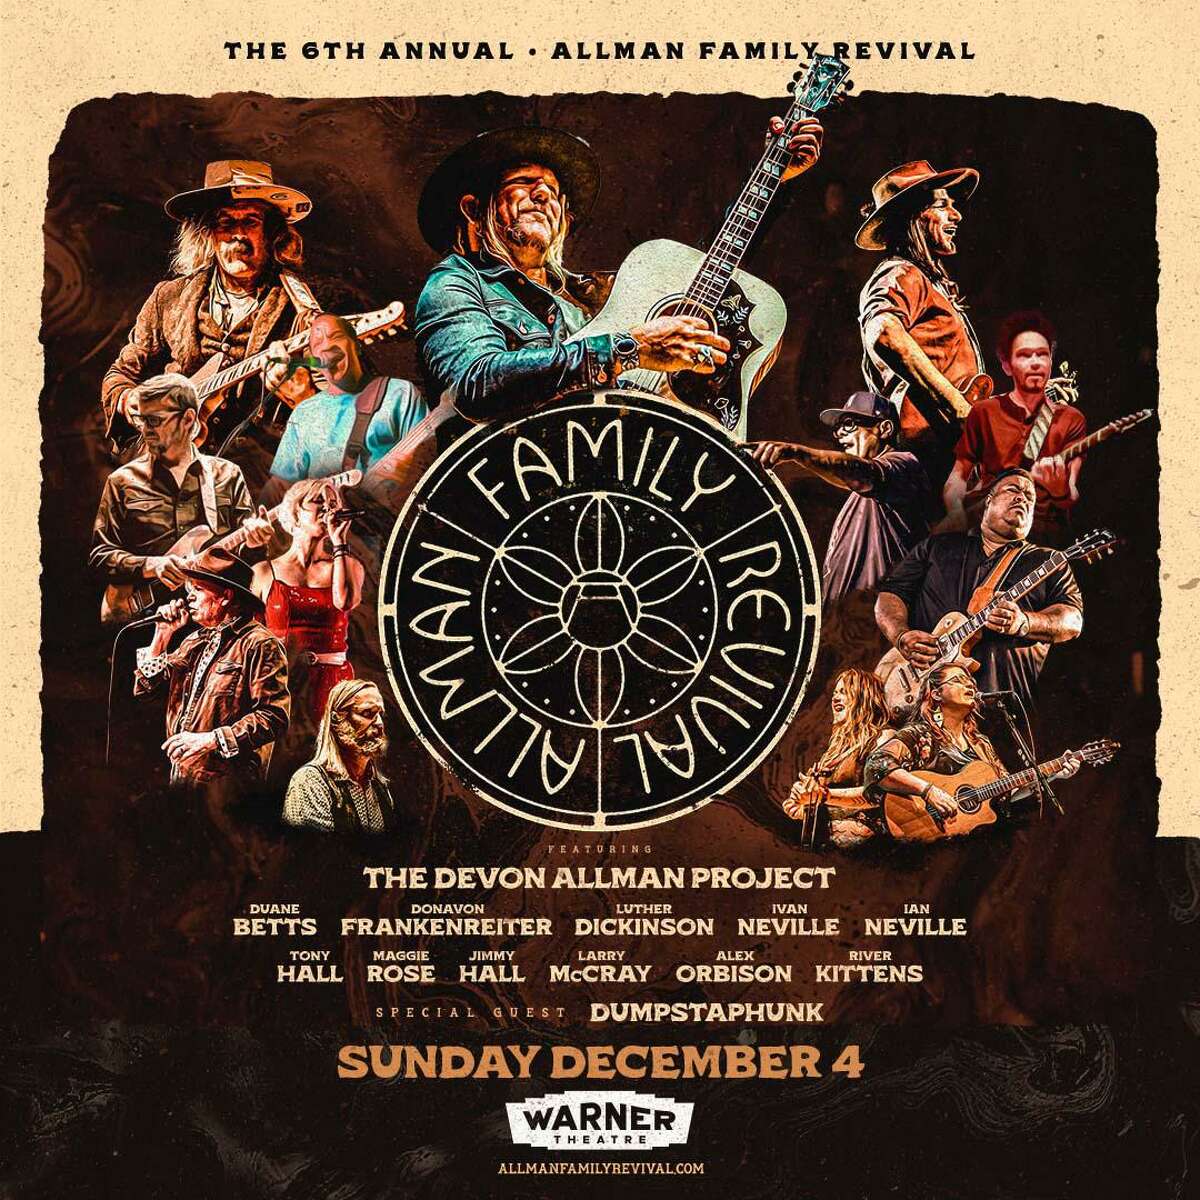 The Warner Theatre welcomes the Allman Family Revival Dec. 4 to the Oneglia Theatre Main Stage.